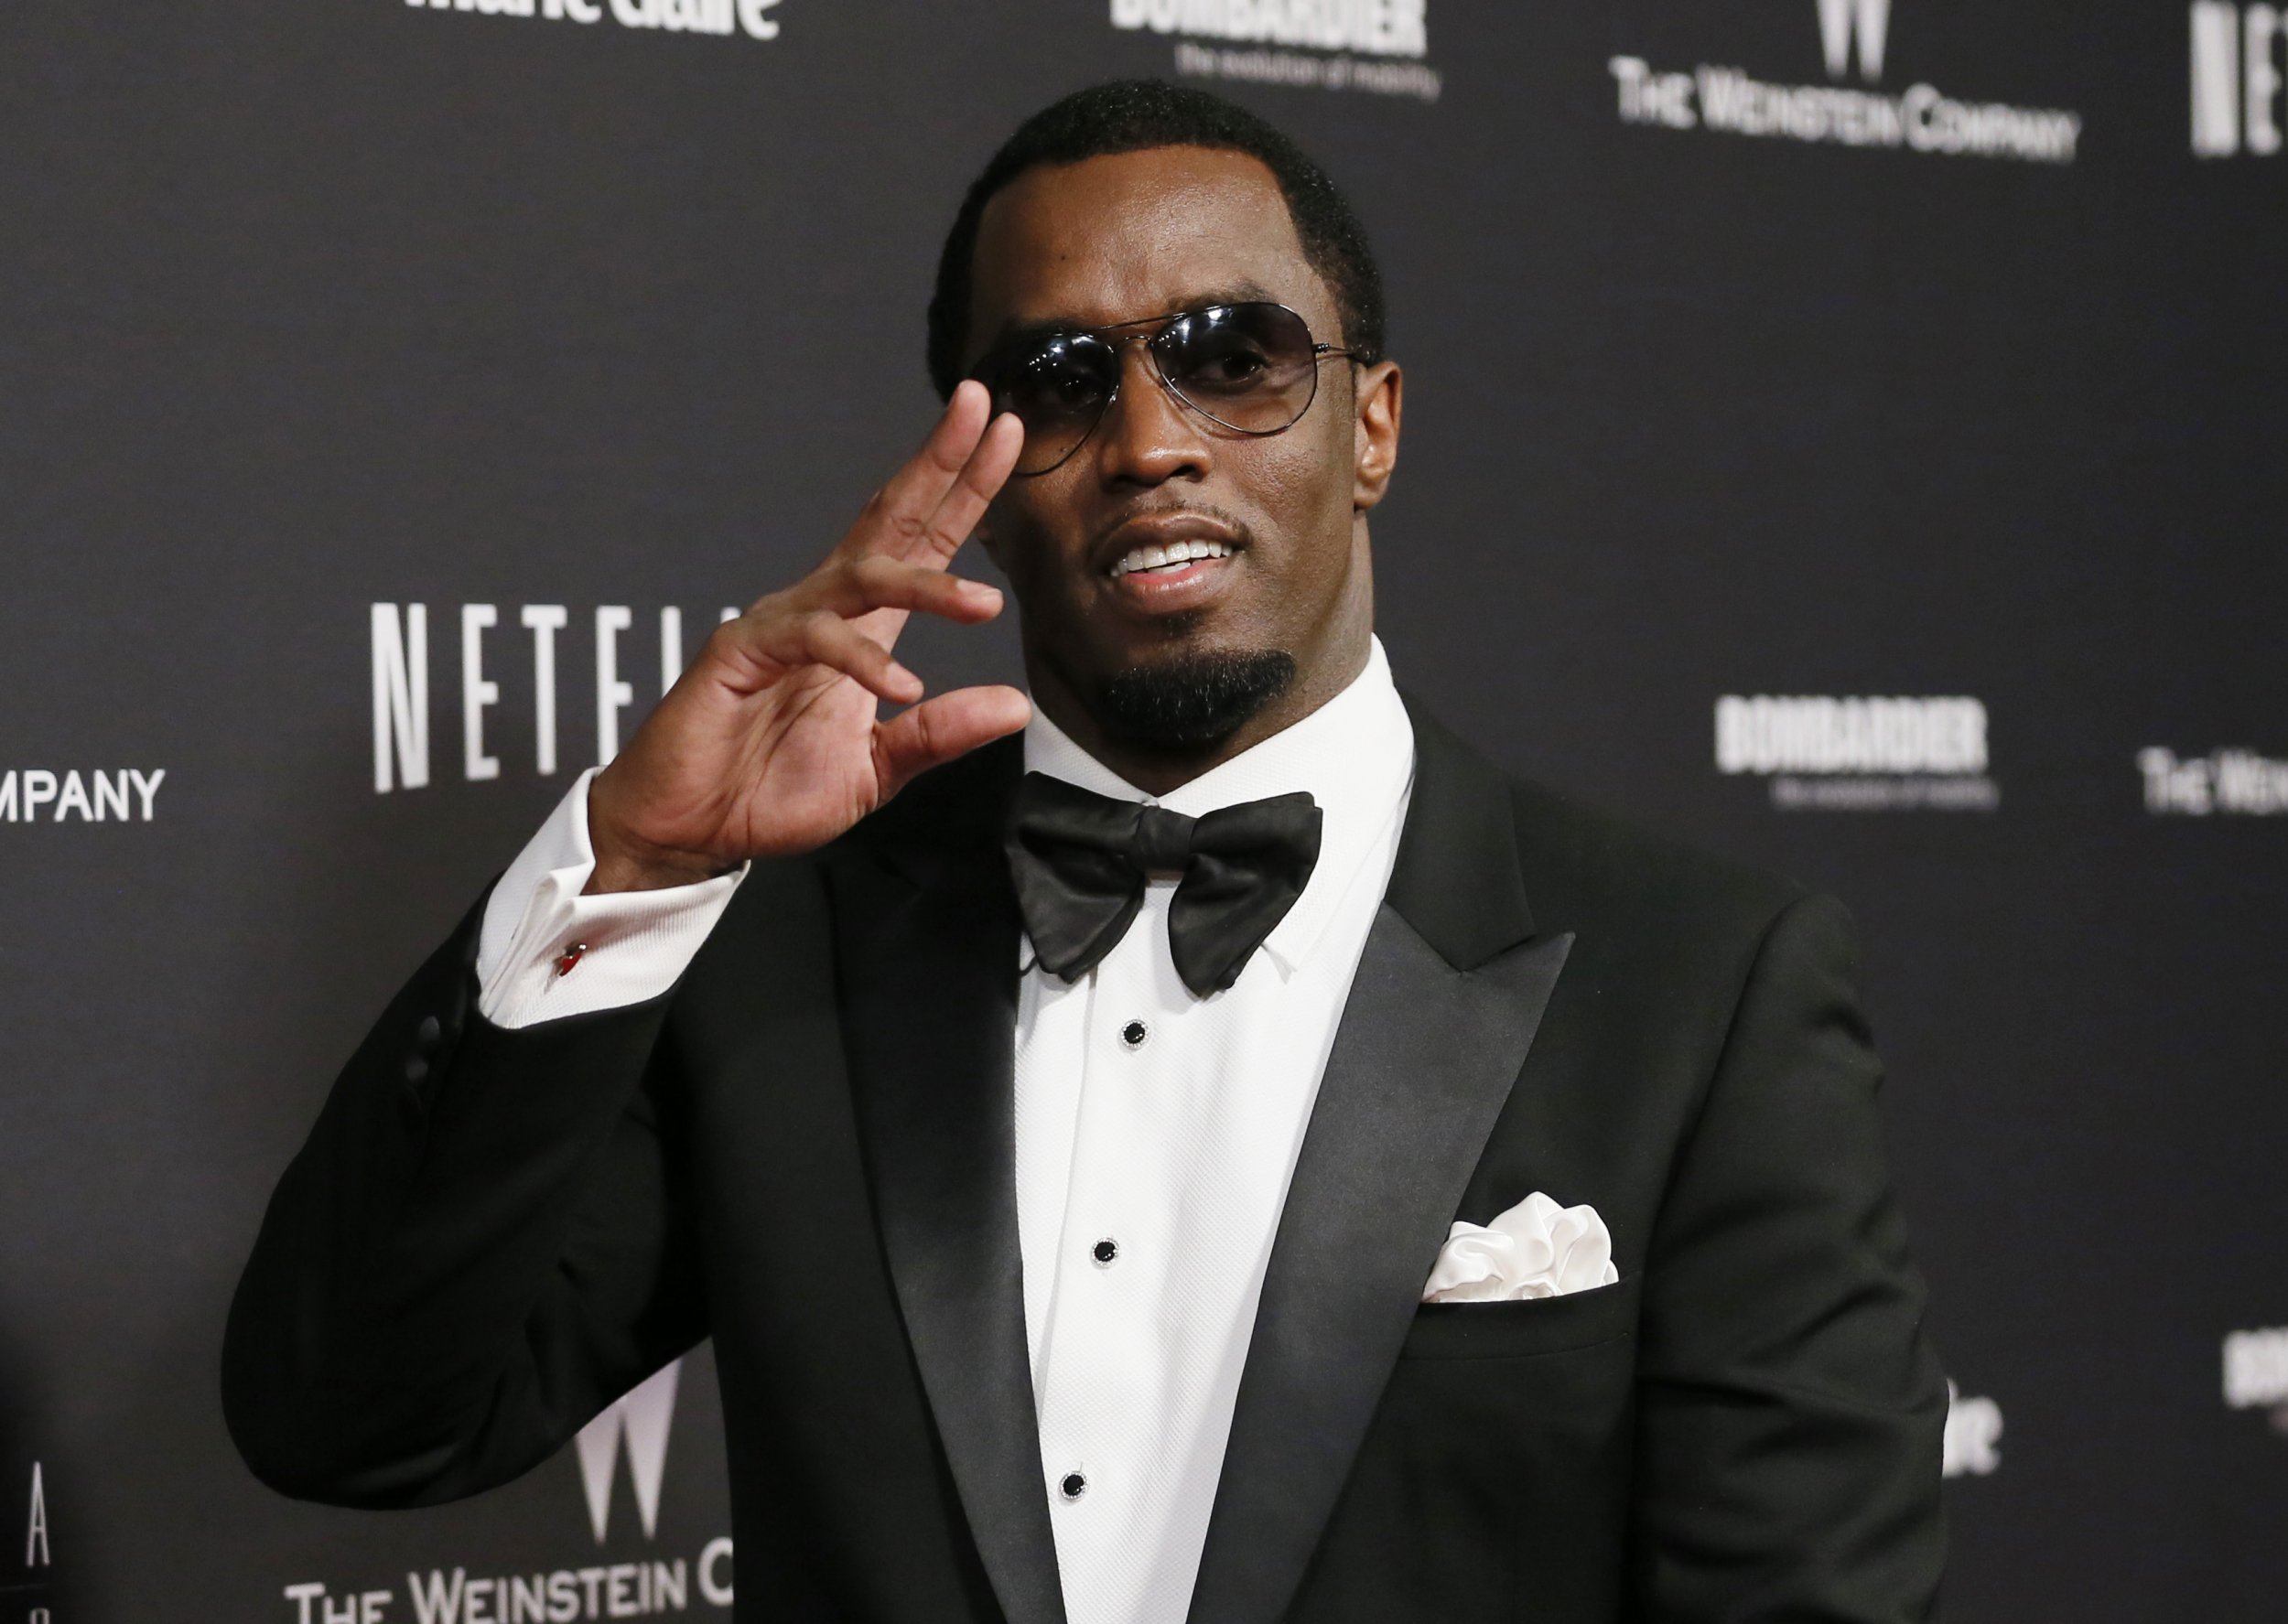 From Sean Combs To Diddy: The Evolution Of A Name And The Man Behind It